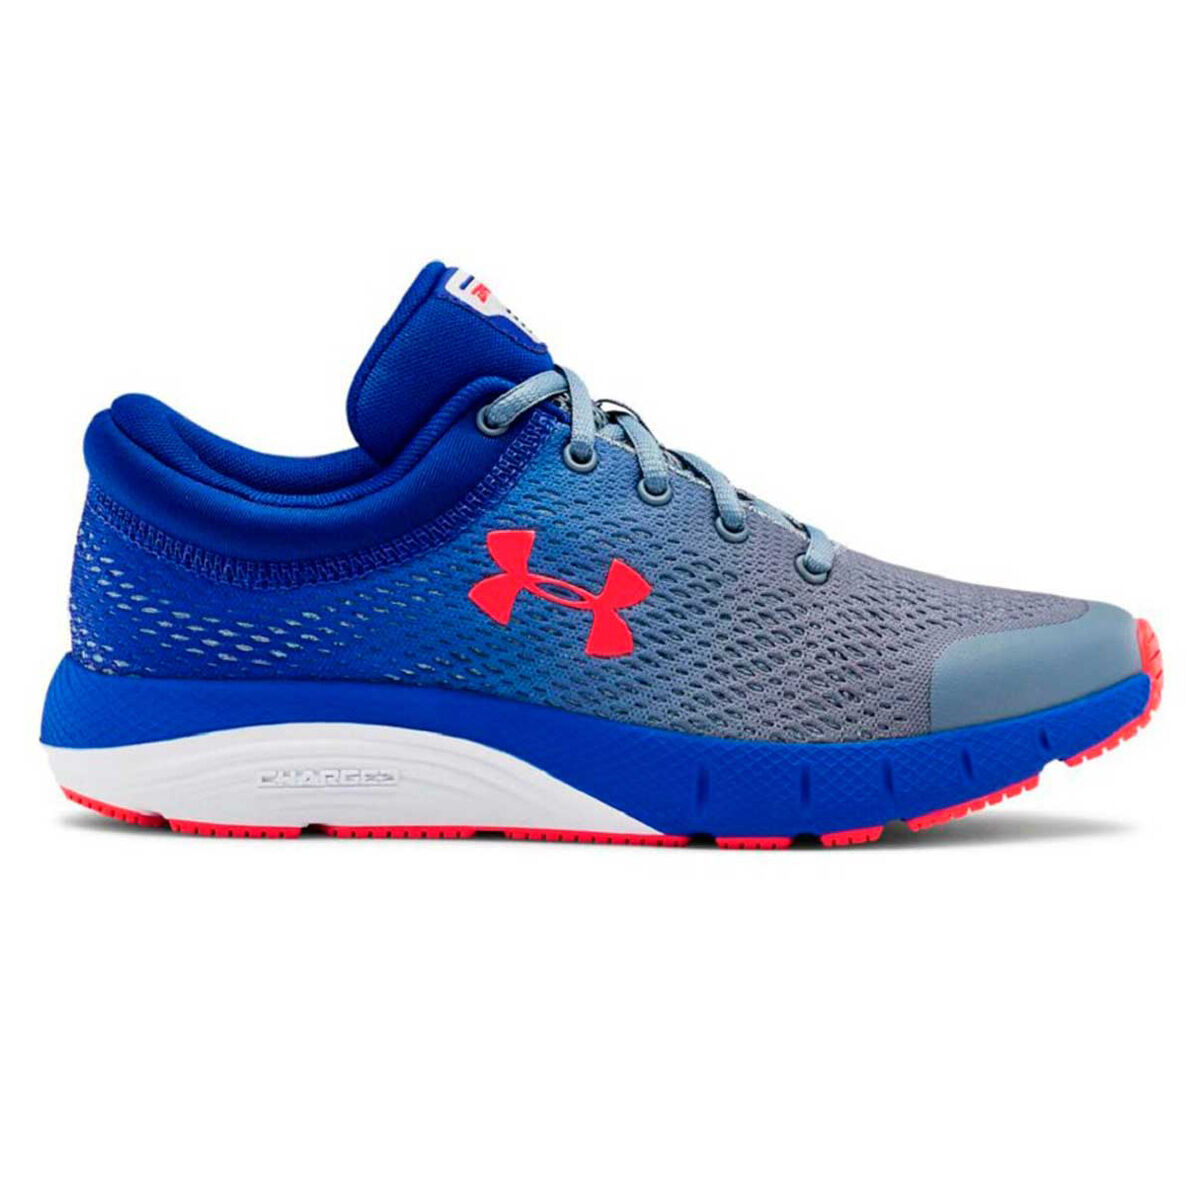 Under Armour Charged Bandit 5 Kids 